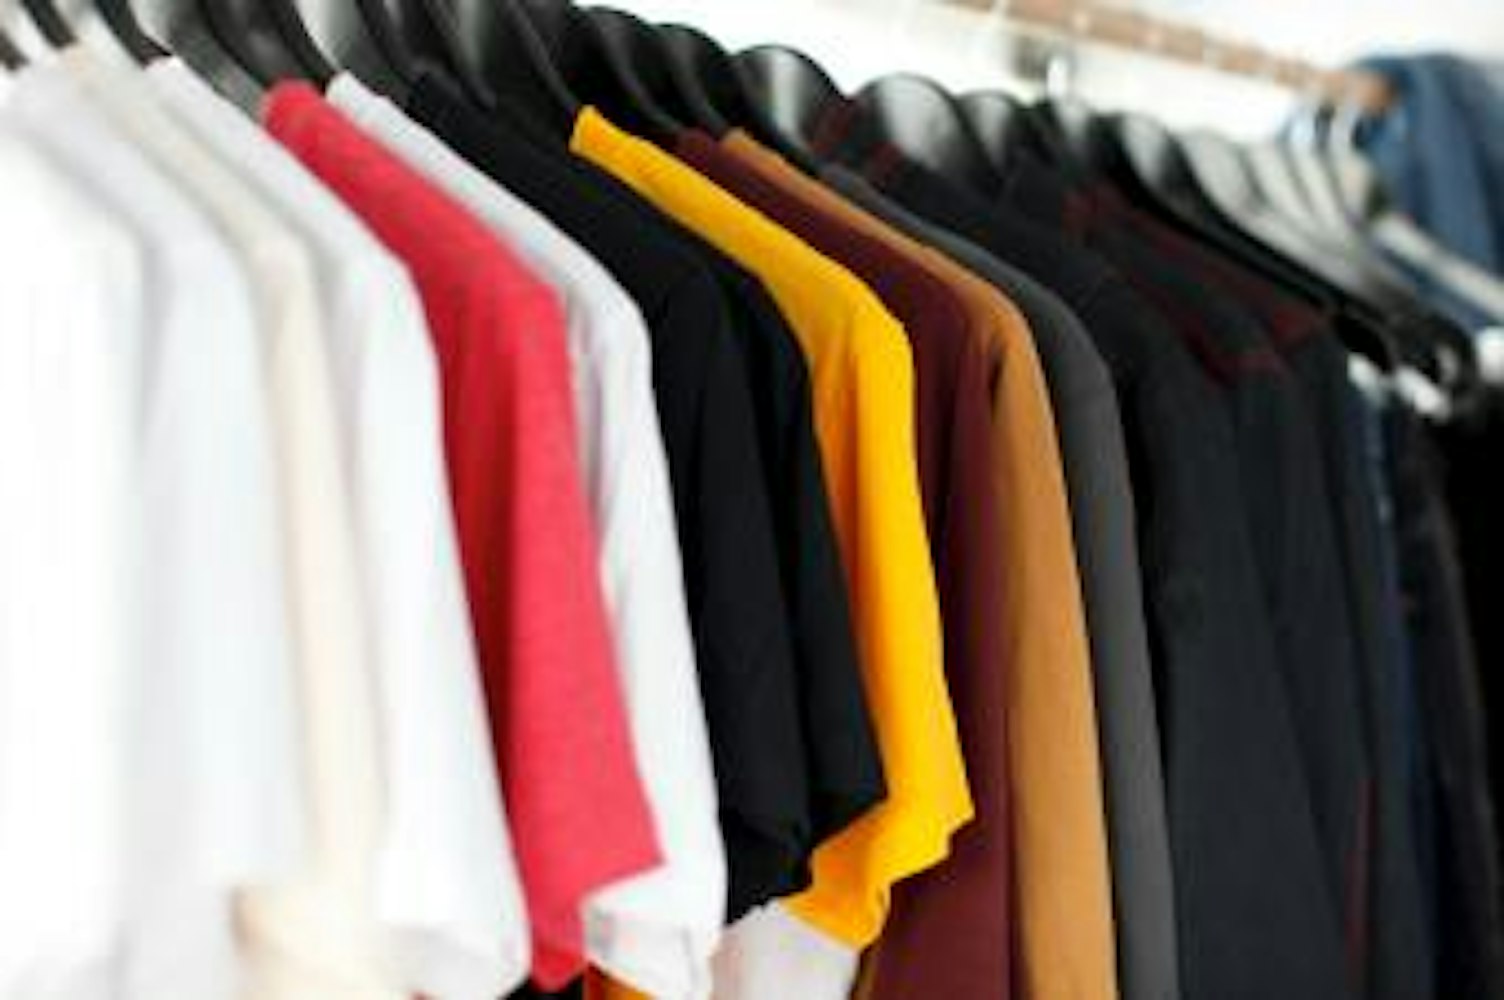 Assorted Shirts Hanged on Clothes Rack